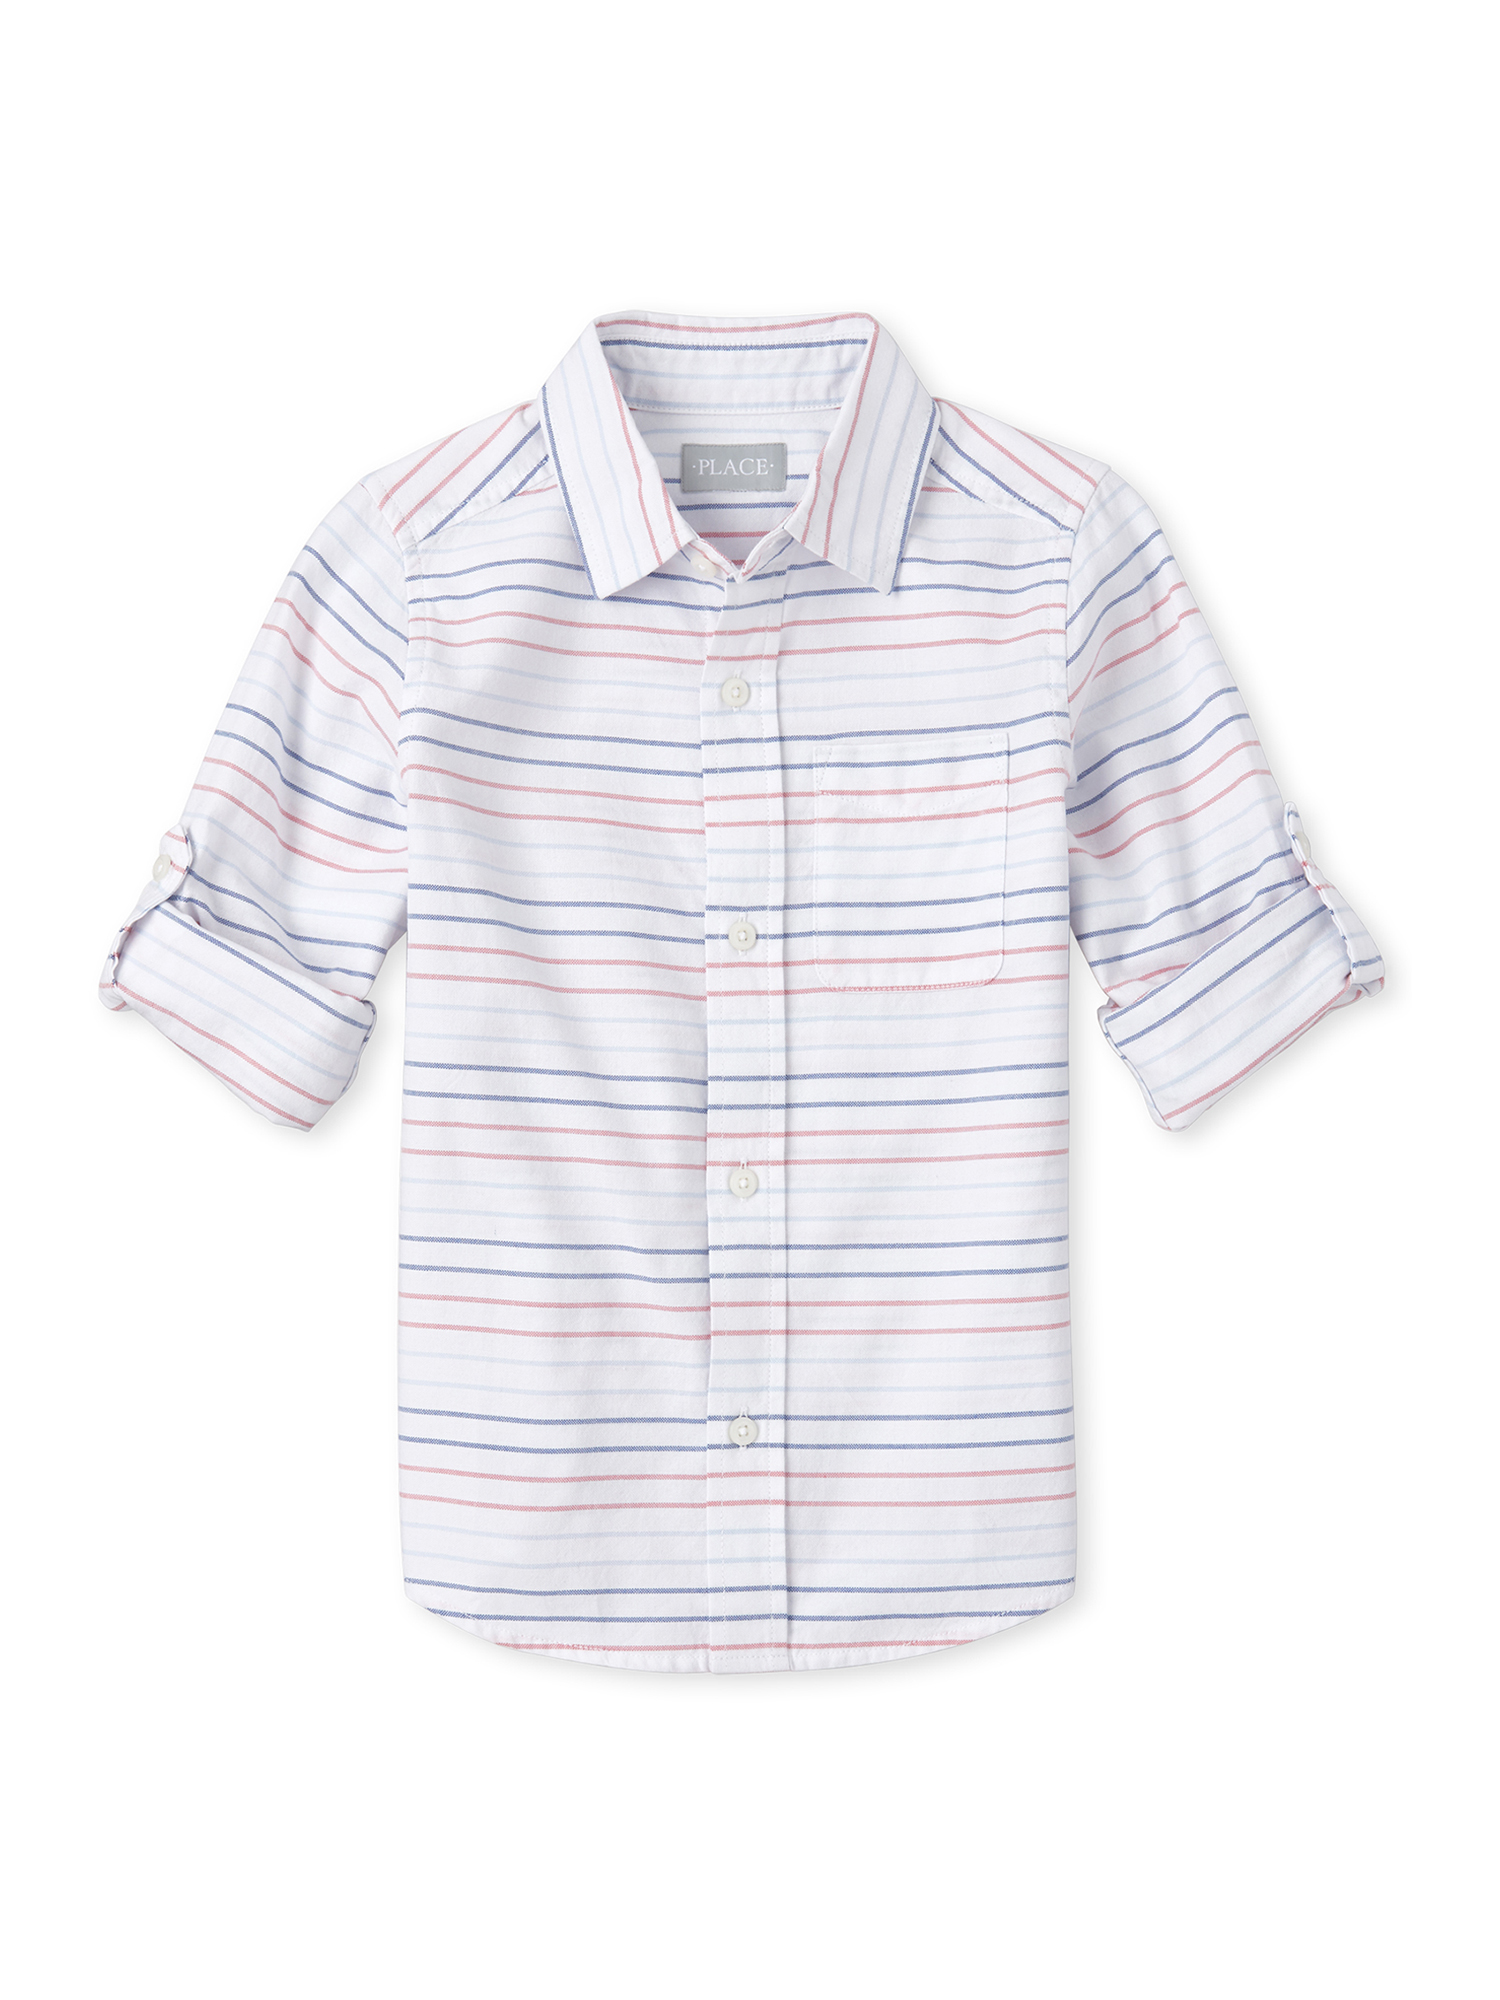 The Children's Place Boys Long Sleeve Oxford Striped Button Down Shirt Sizes 4-16 - image 2 of 2